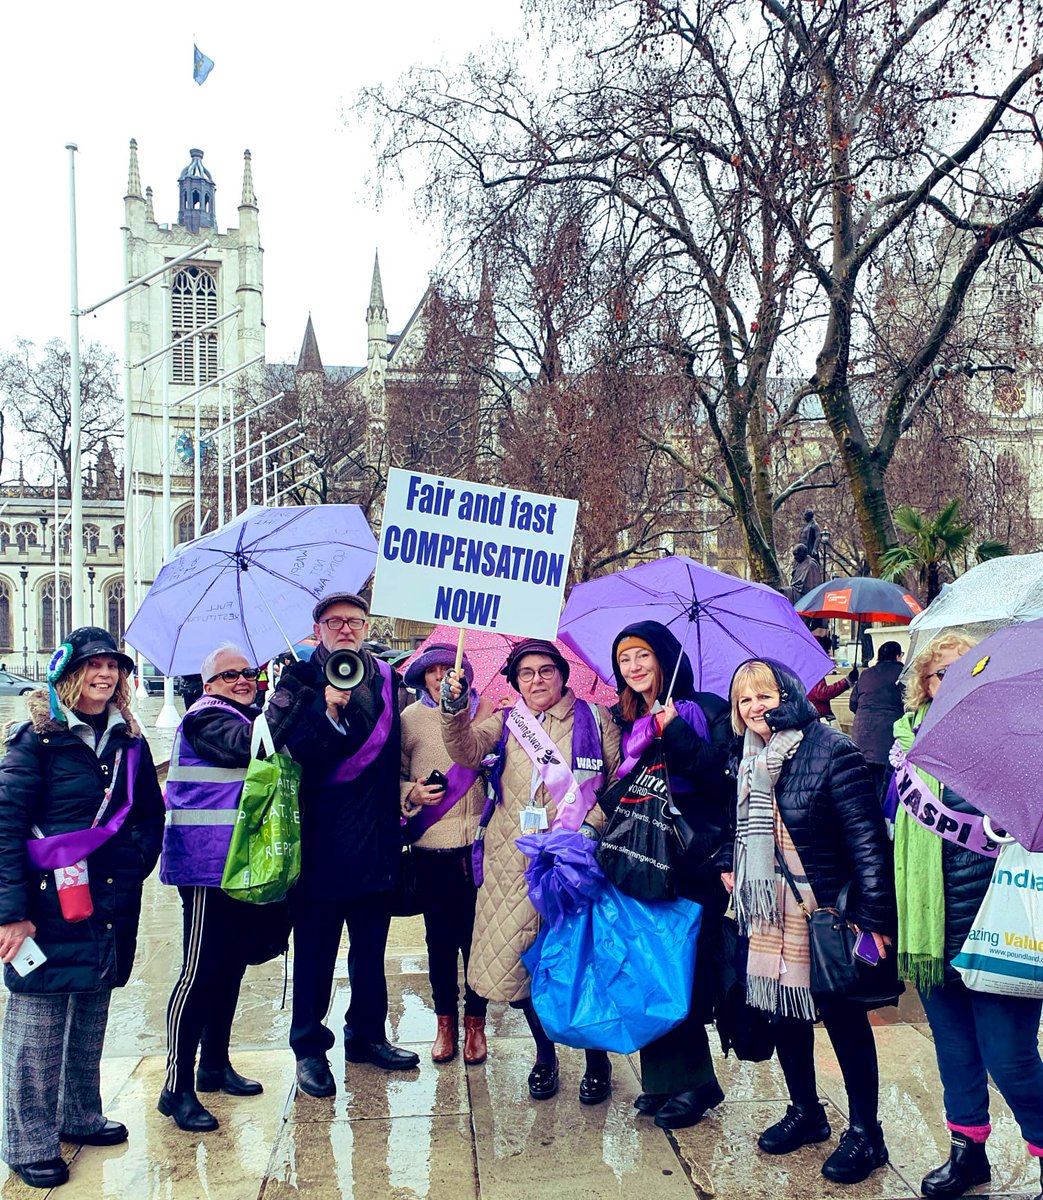 Millions of women born in the 1950s have been cheated out of their pensions. Today’s report is just the first step toward justice. WASPI women must have our continued support until they receive the full compensation they deserve.